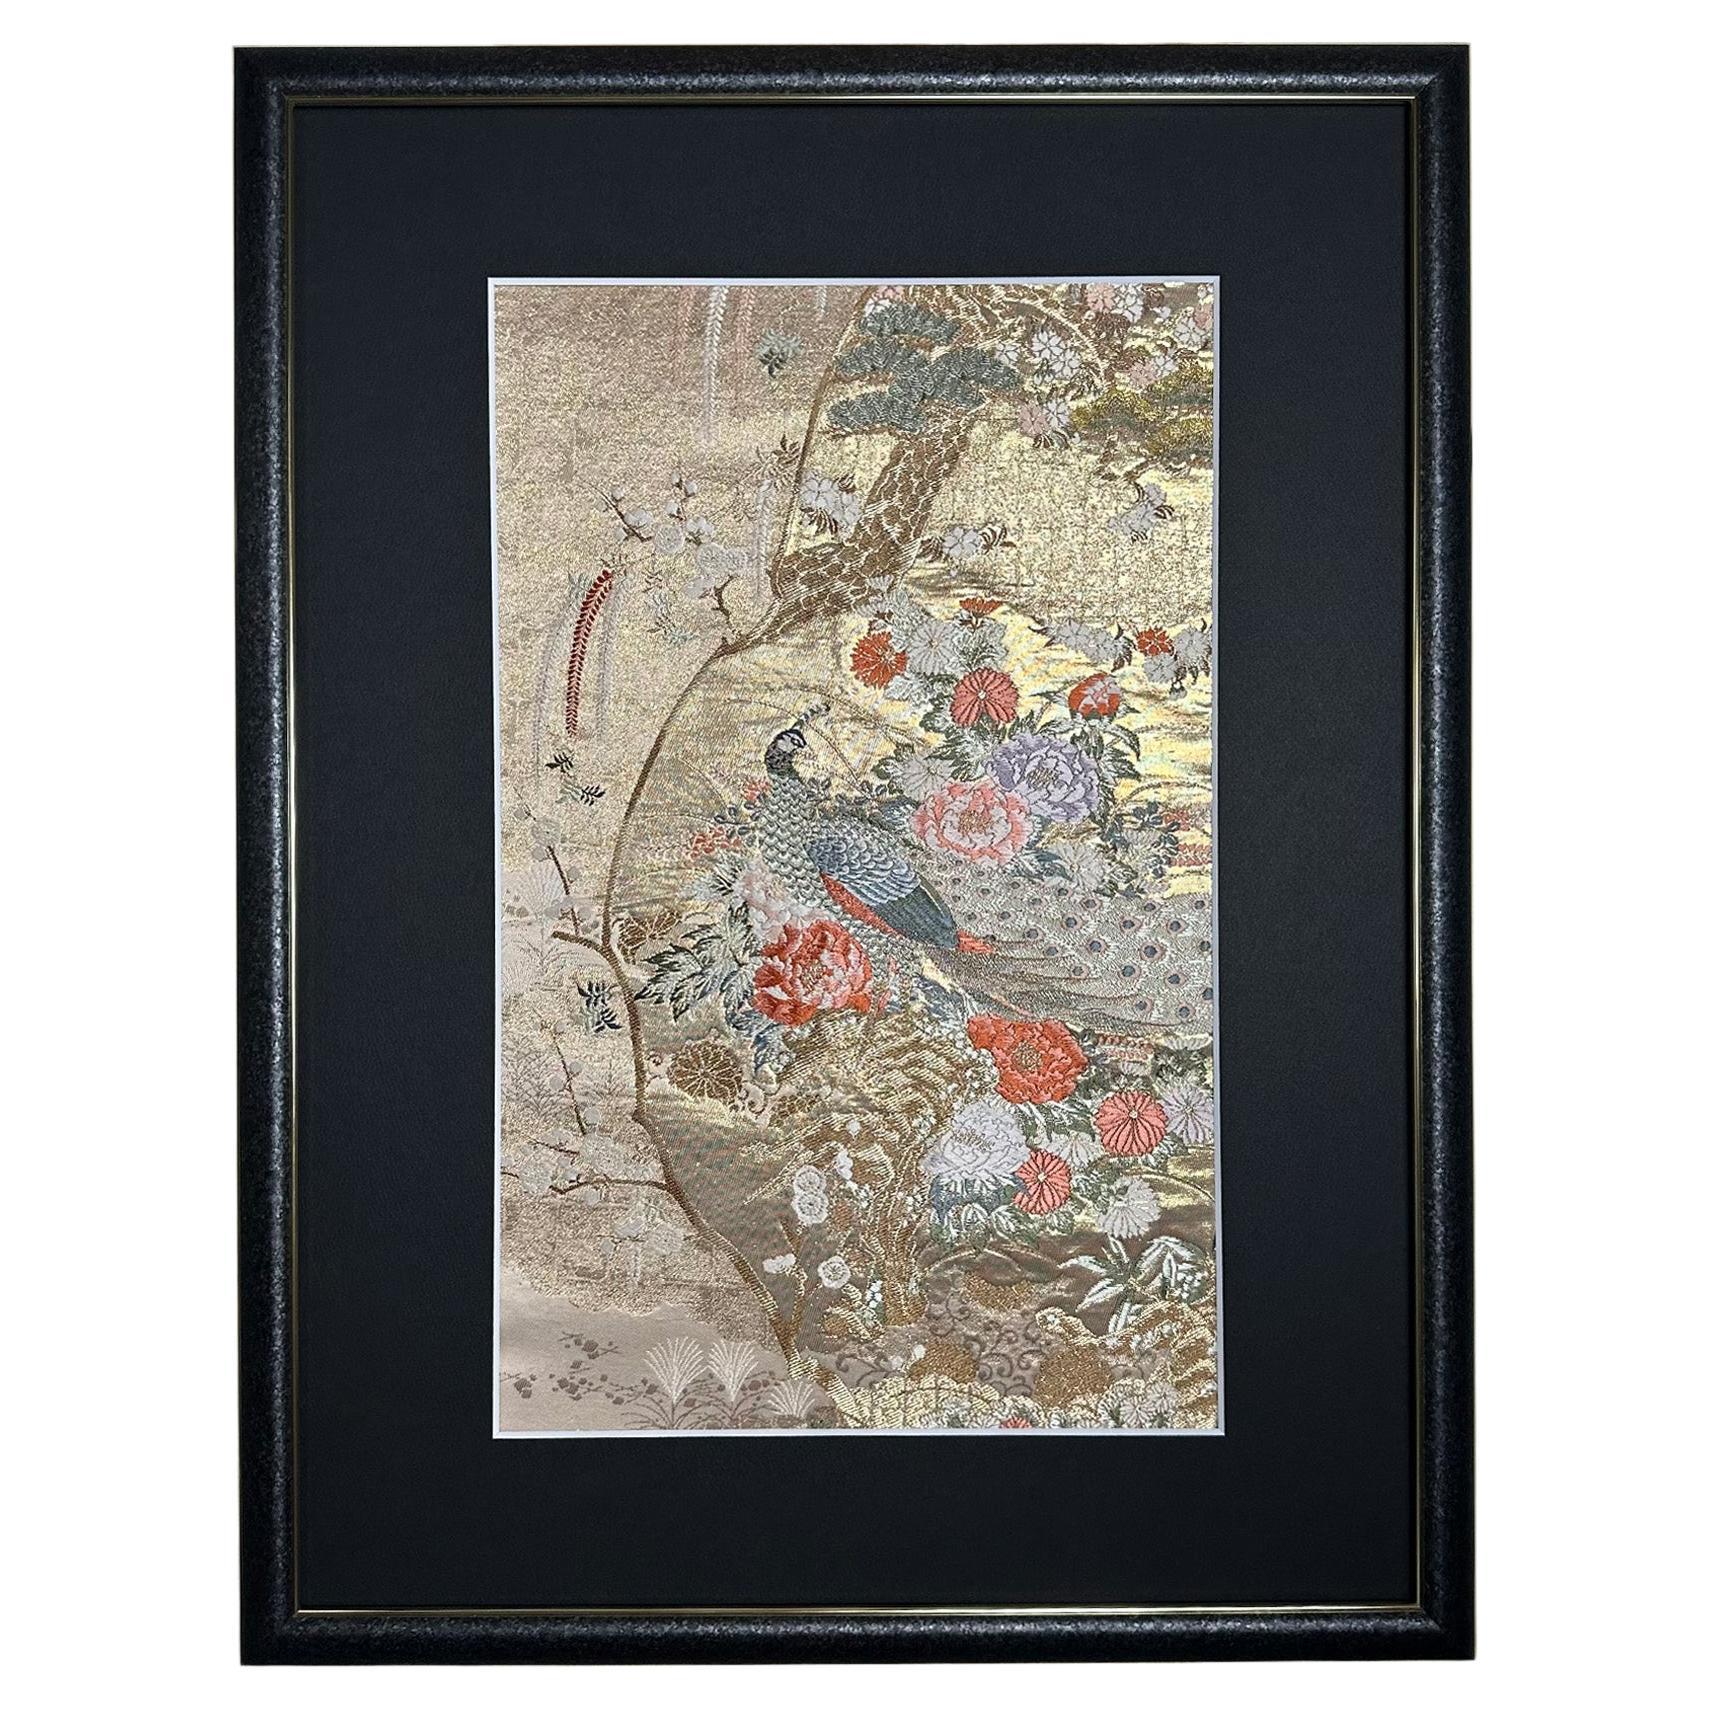 Framed Kimono Art, "The Queen of Peacocks" by Kimono-Couture, Japanese Wall Art